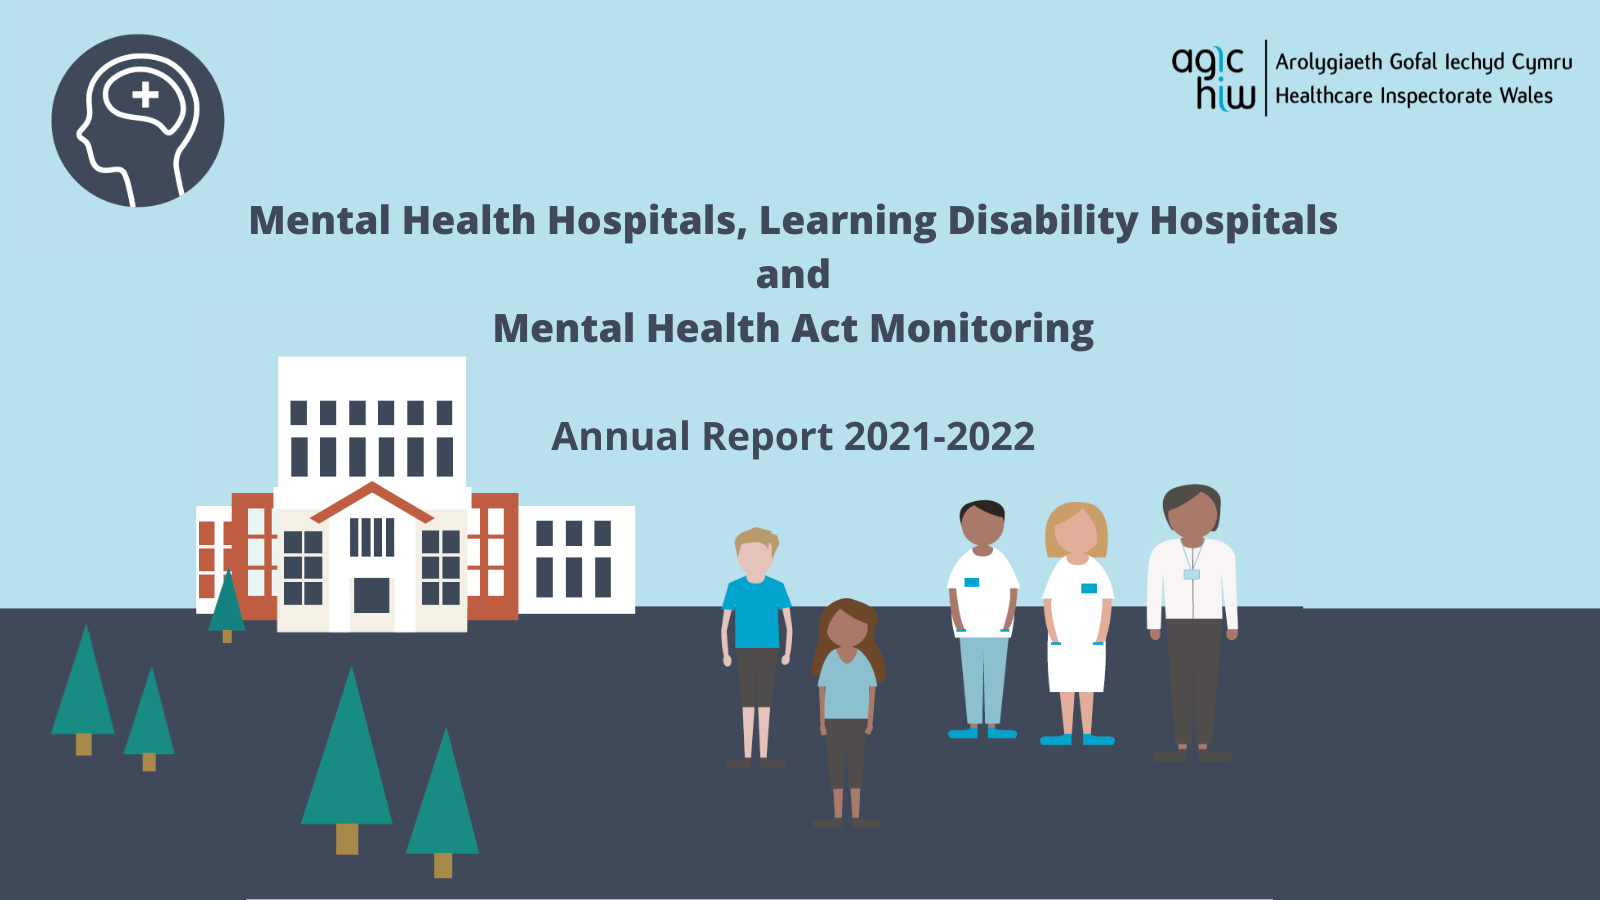 Mental Health Hospitals, Learning Disability Hospitals and Mental Health Act Monitoring  Annual Report 2021-2022